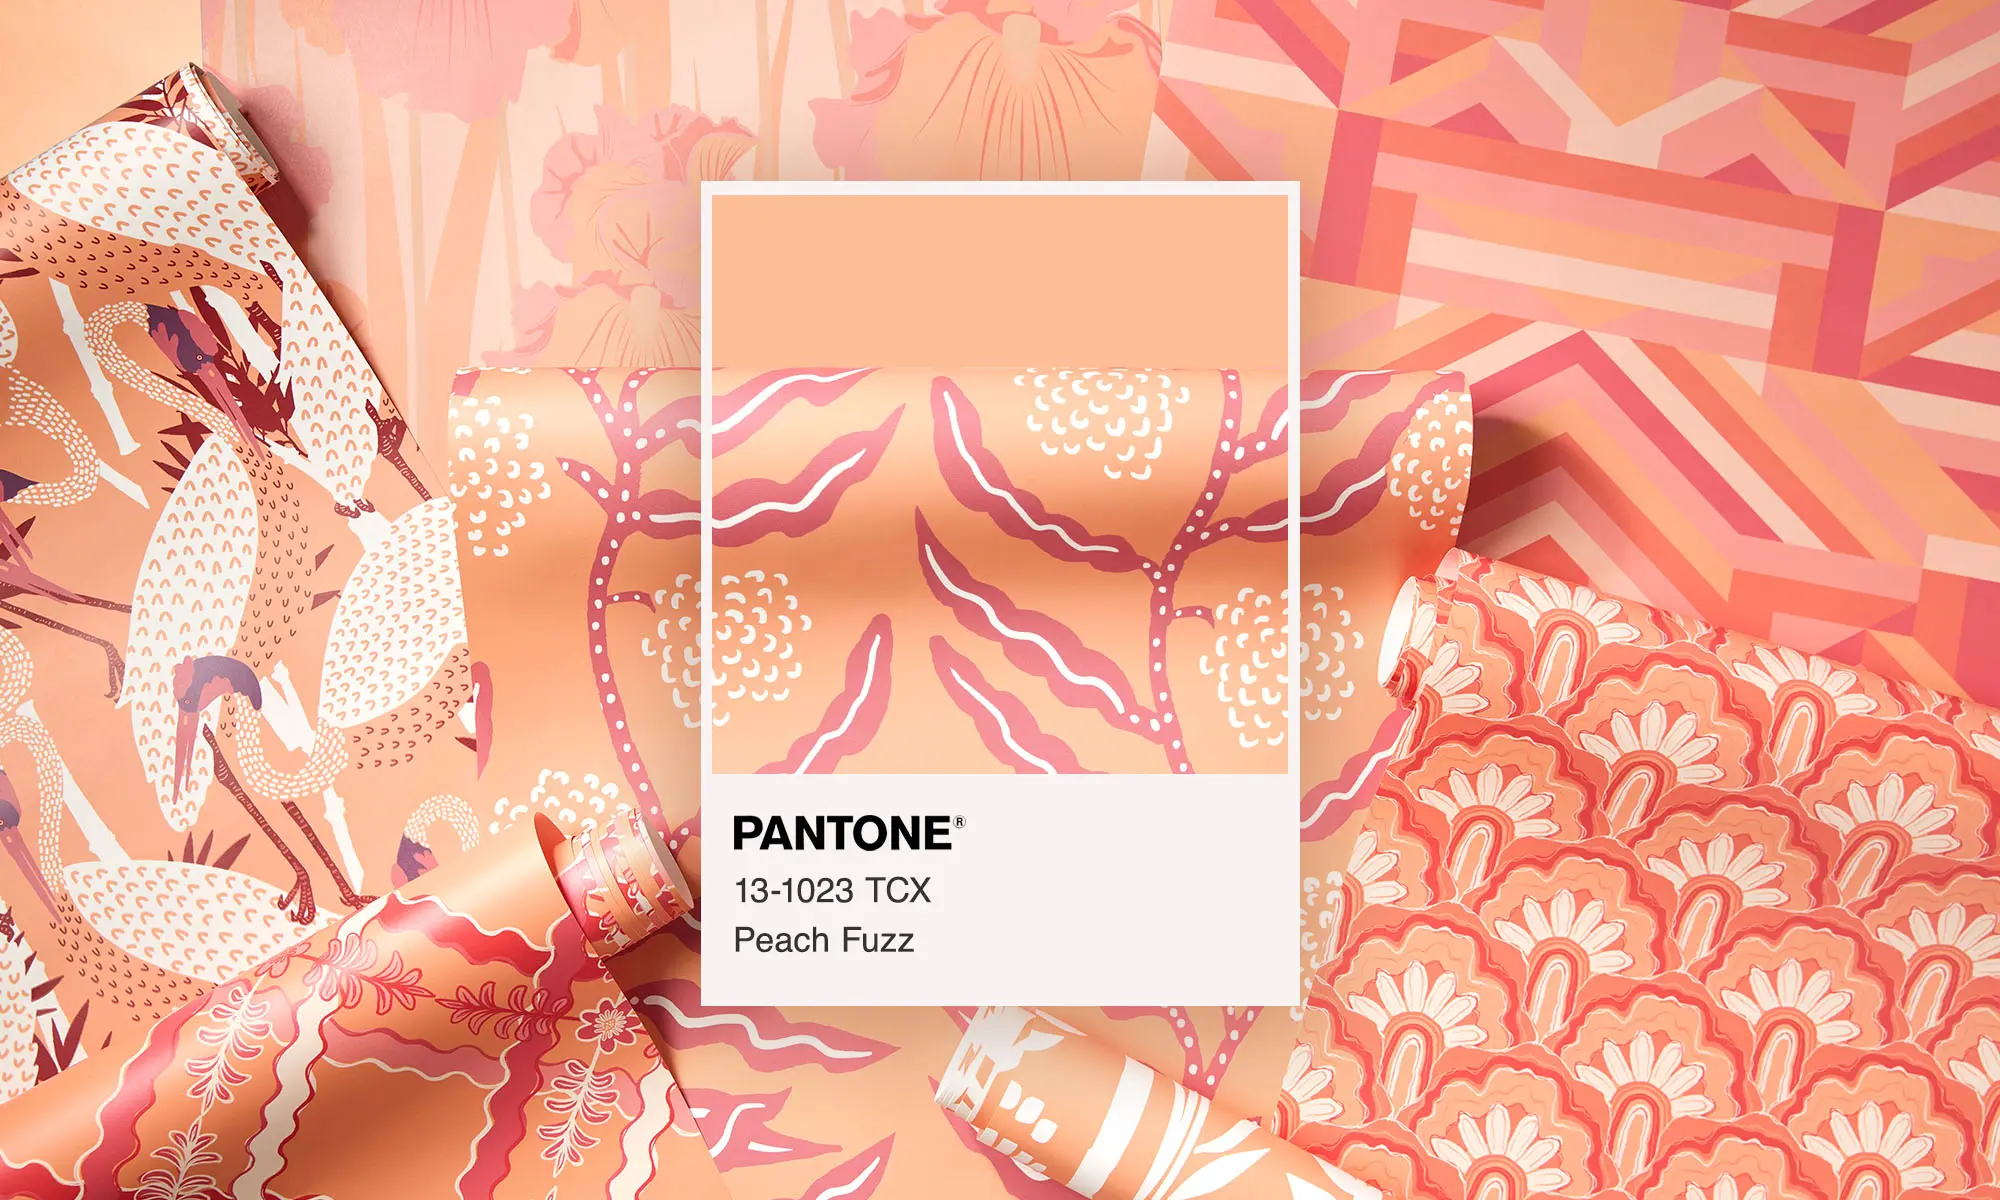 A laydown of peach fuzz theme wallpaper. The center has a wallpaper swatch of the color.